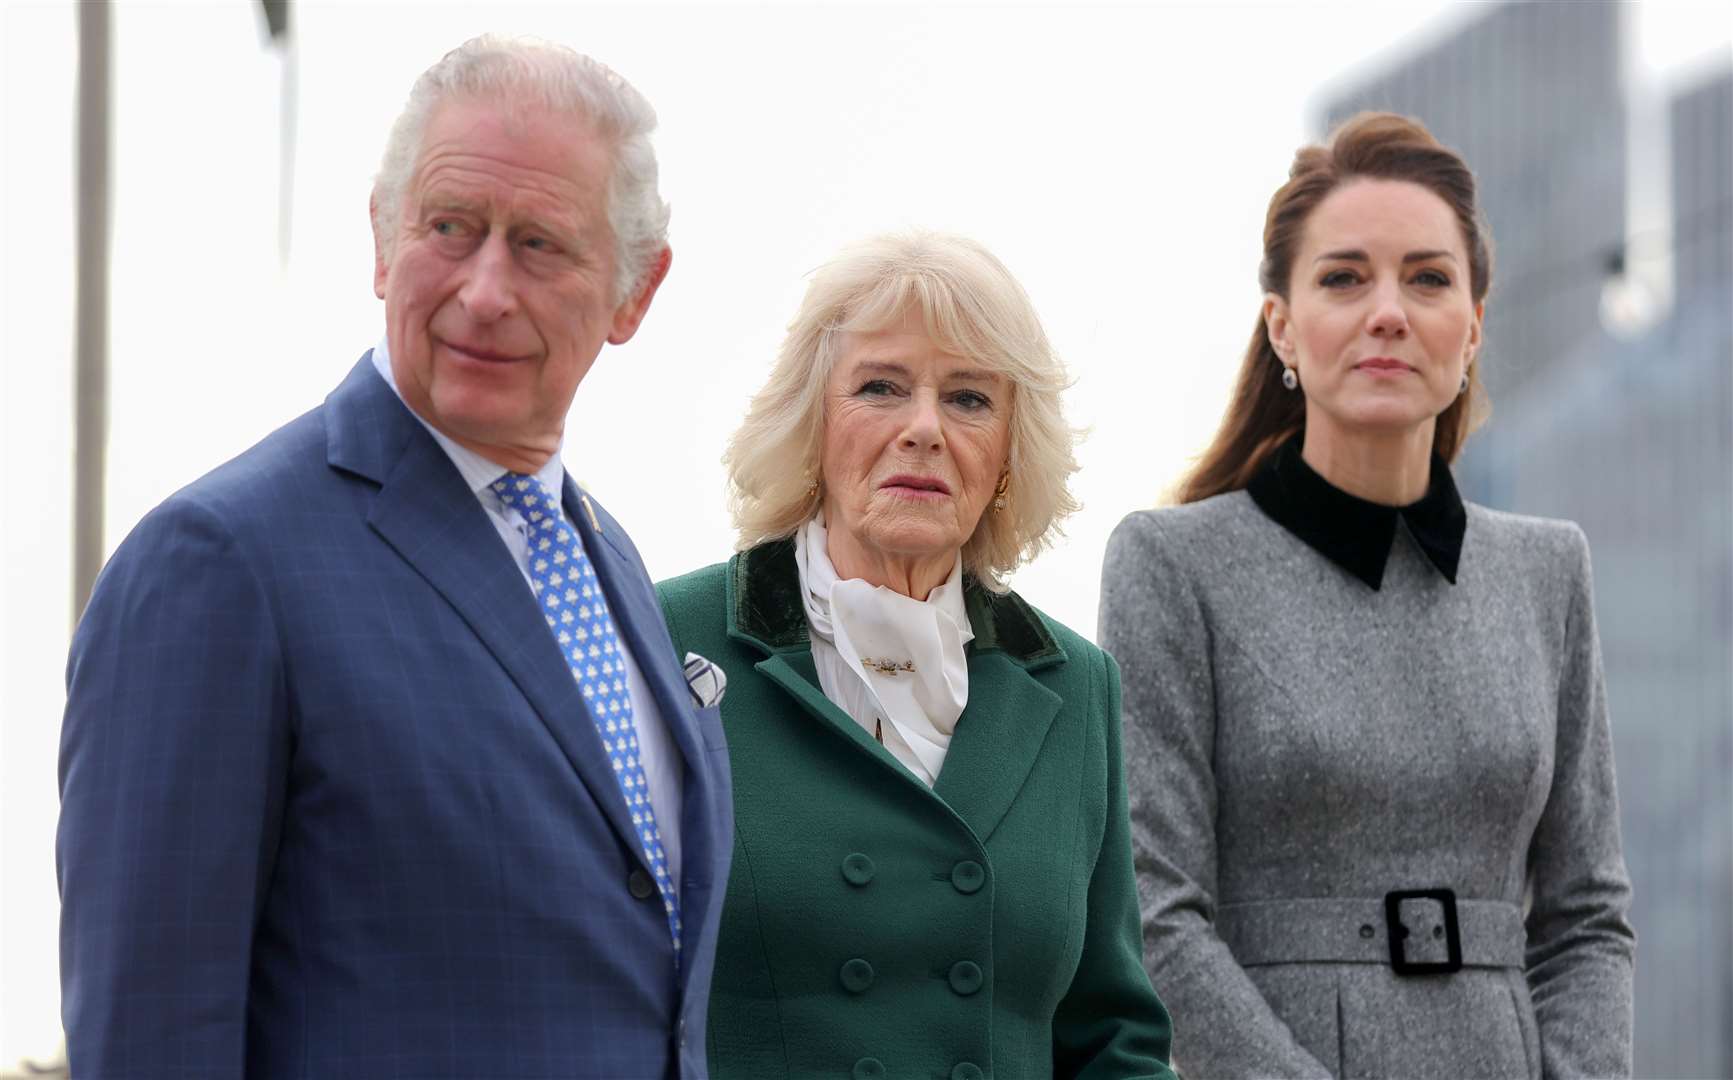 Both Charles and Kate have had a difficult start to the year with health troubles (Chris Jackson/PA)